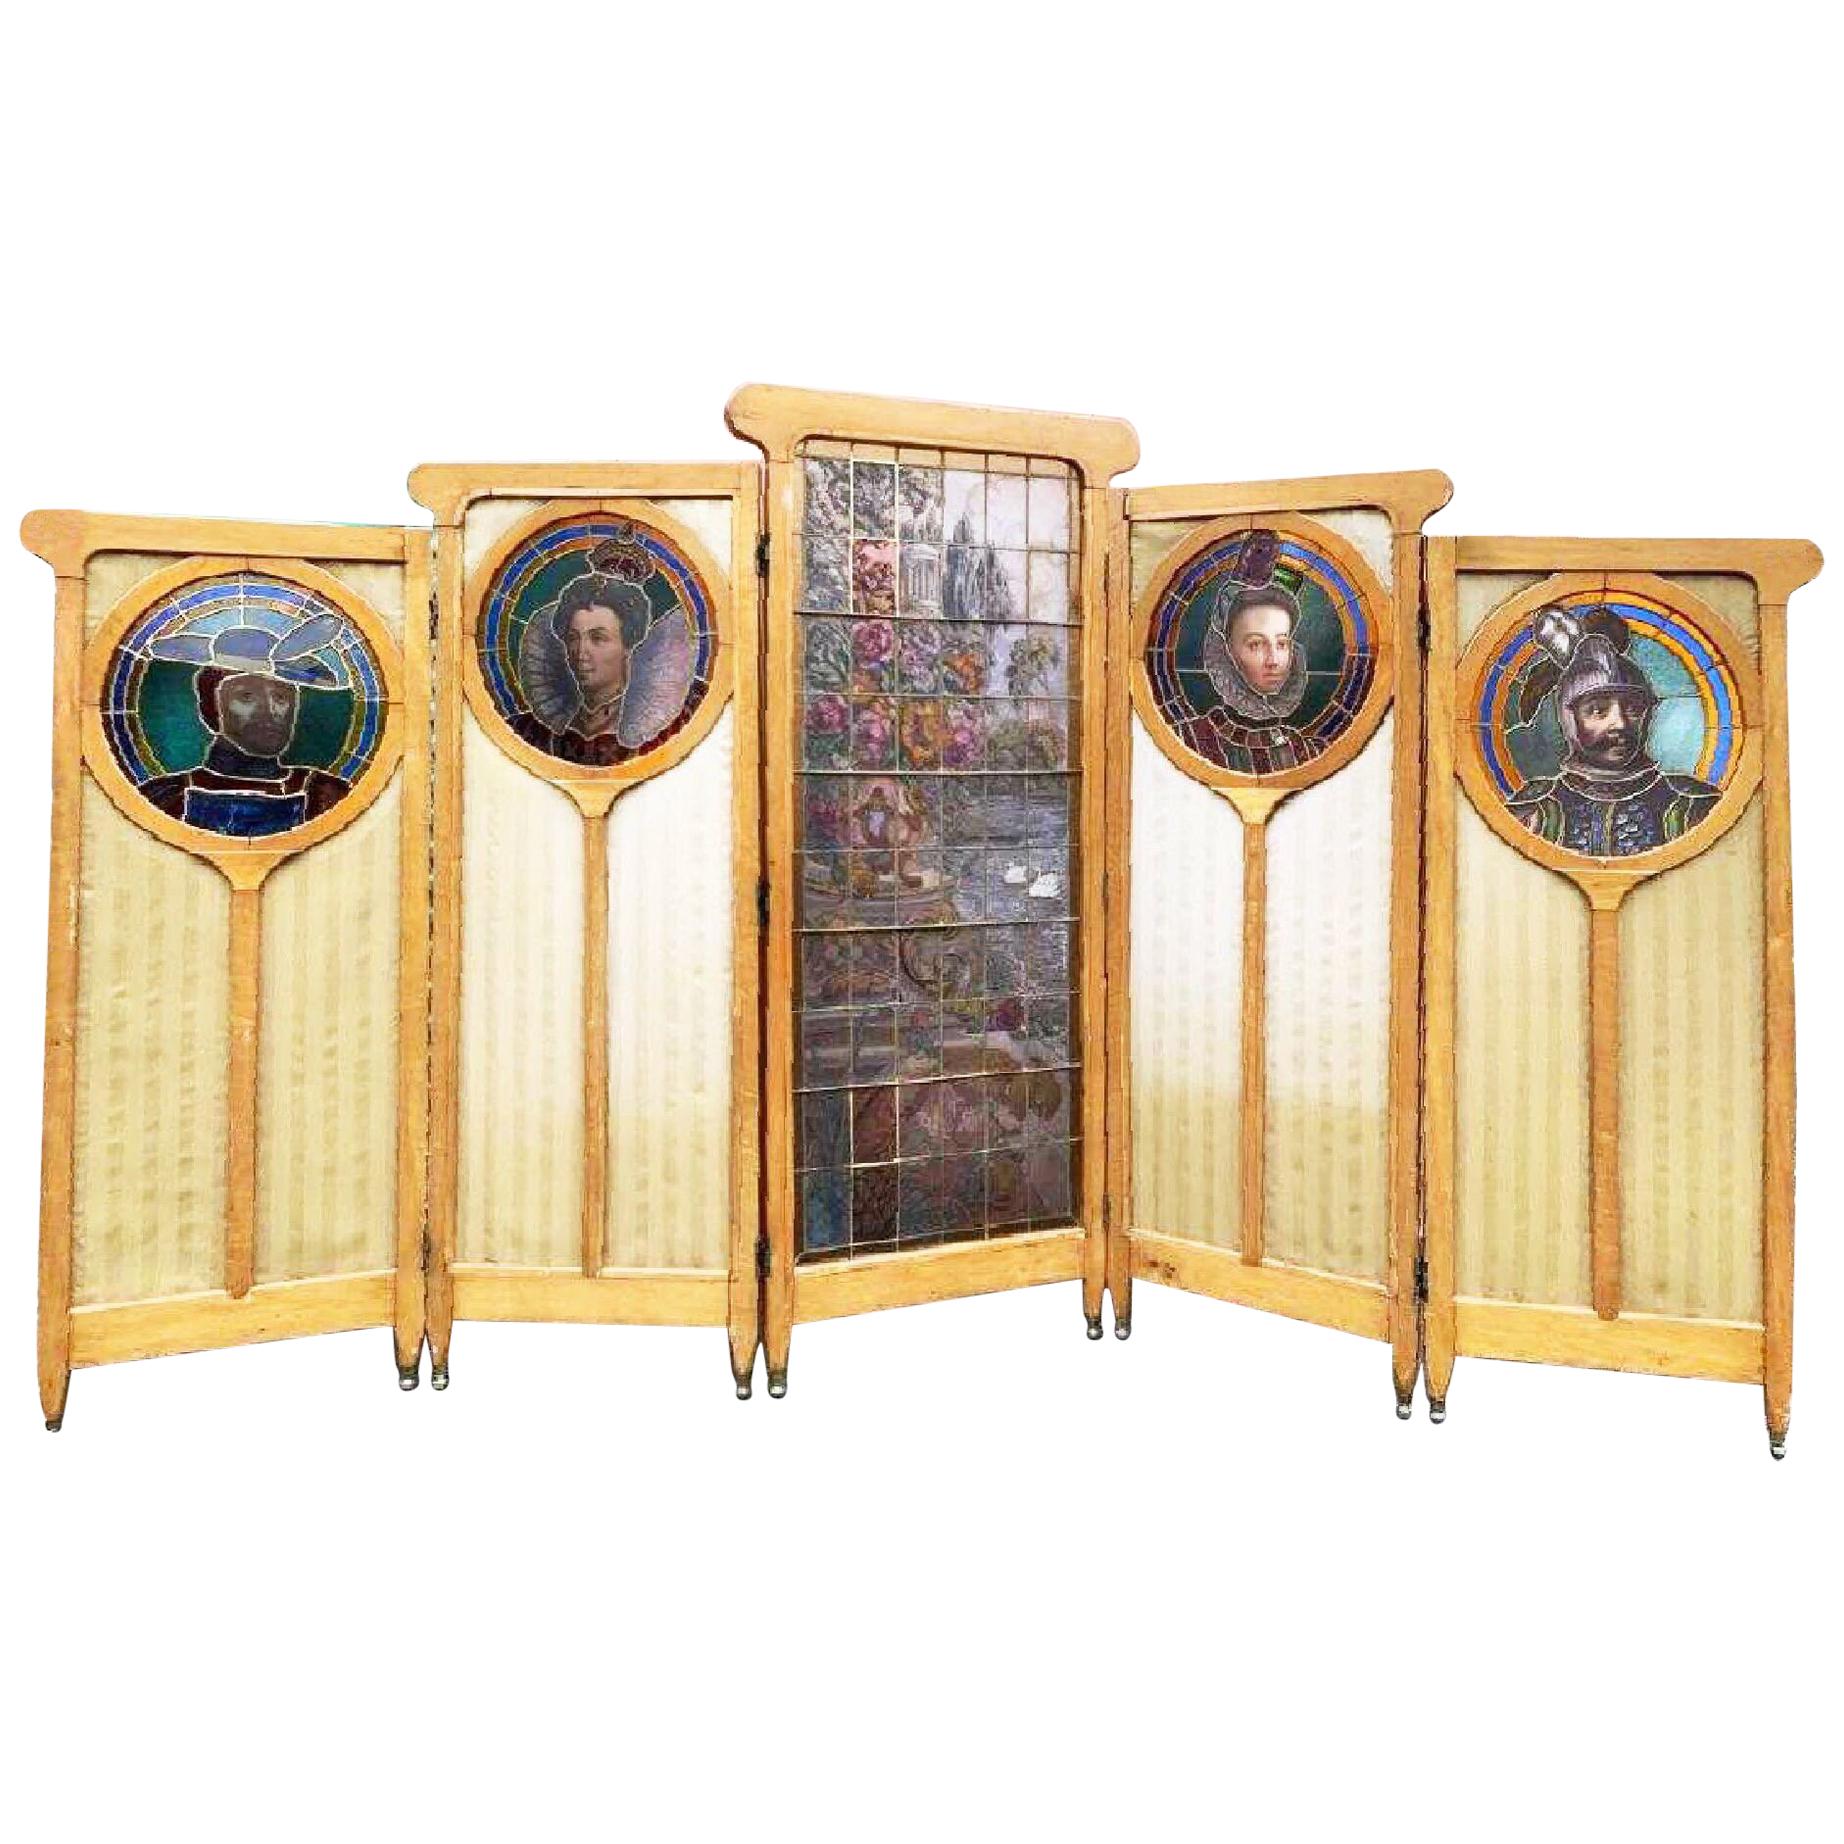 Arts & Crafts Stained Glass and Silk 5-Panel Screen in Walnut, Art Nouveau Glass